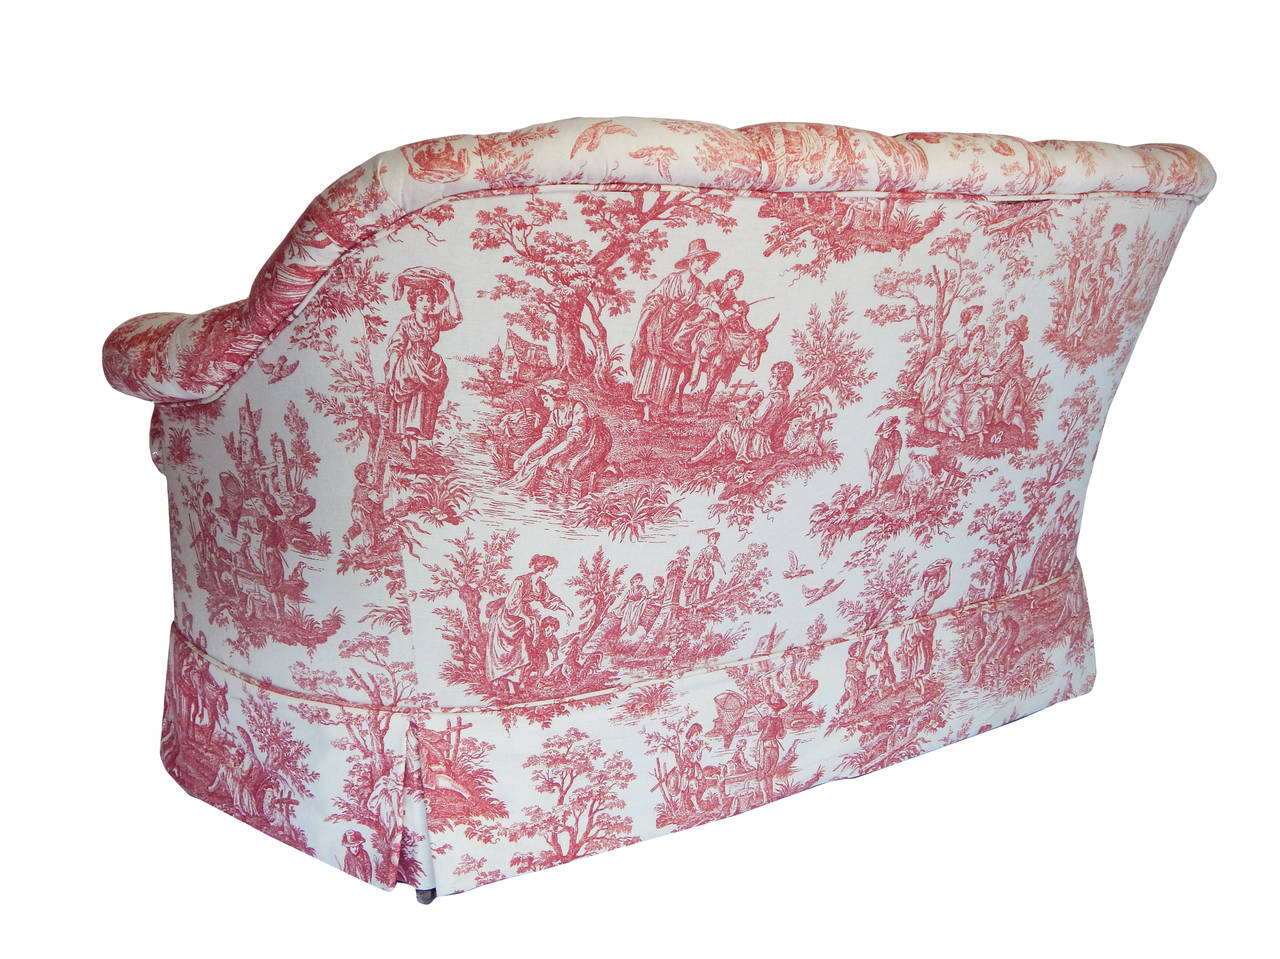 Pair of Tufted Toile Loveseats 1